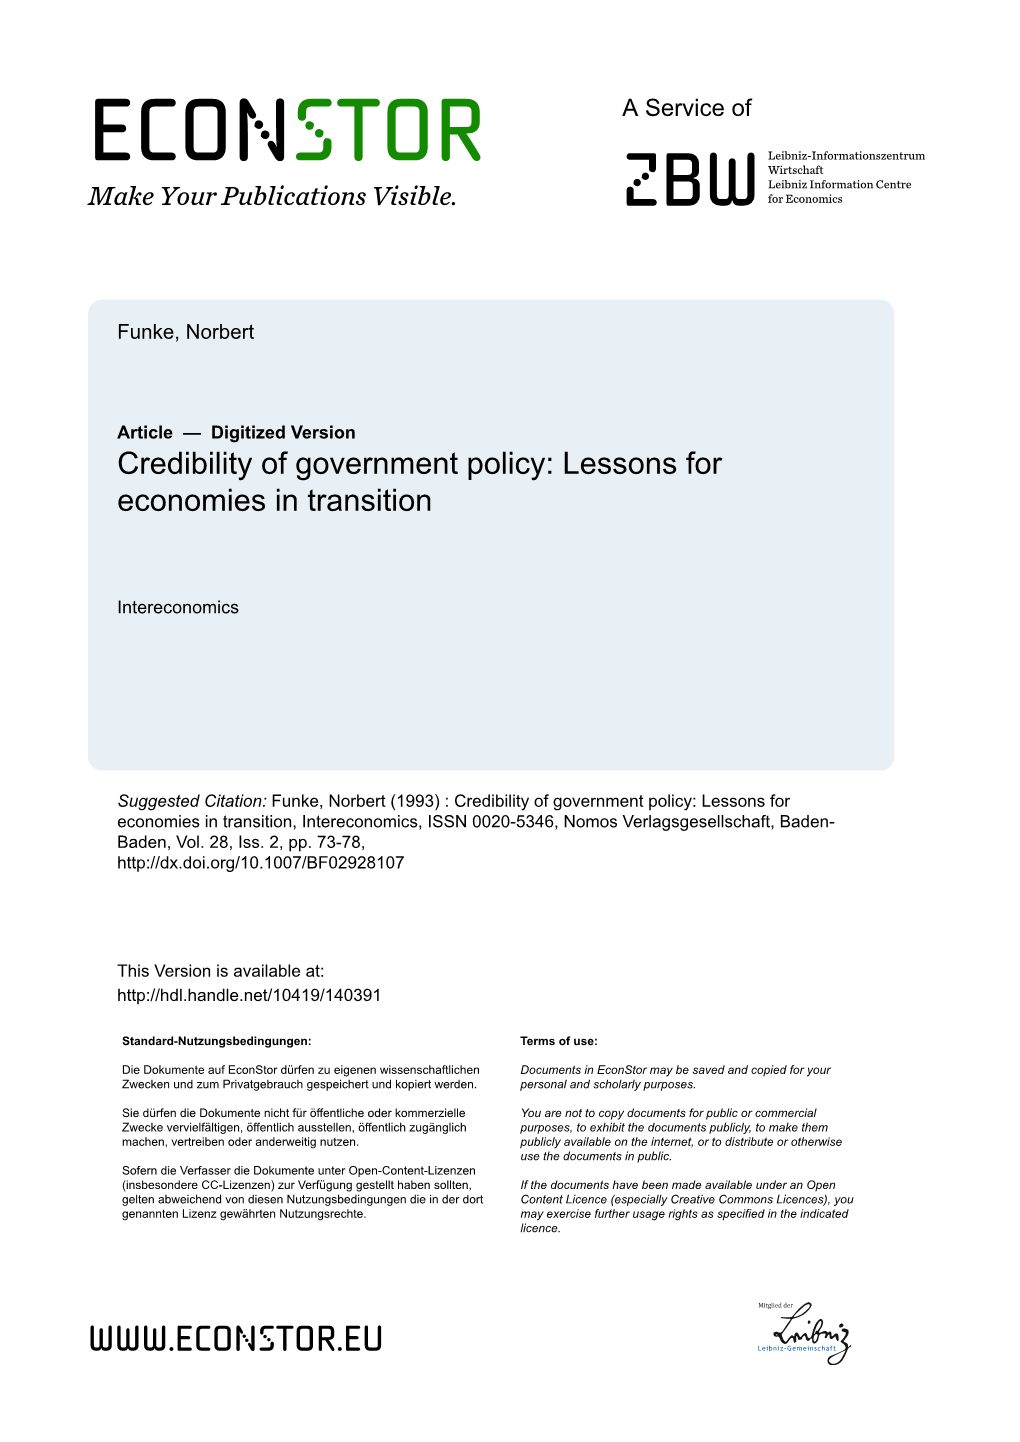 Credibility of Government Policy: Lessons for Economies in Transition